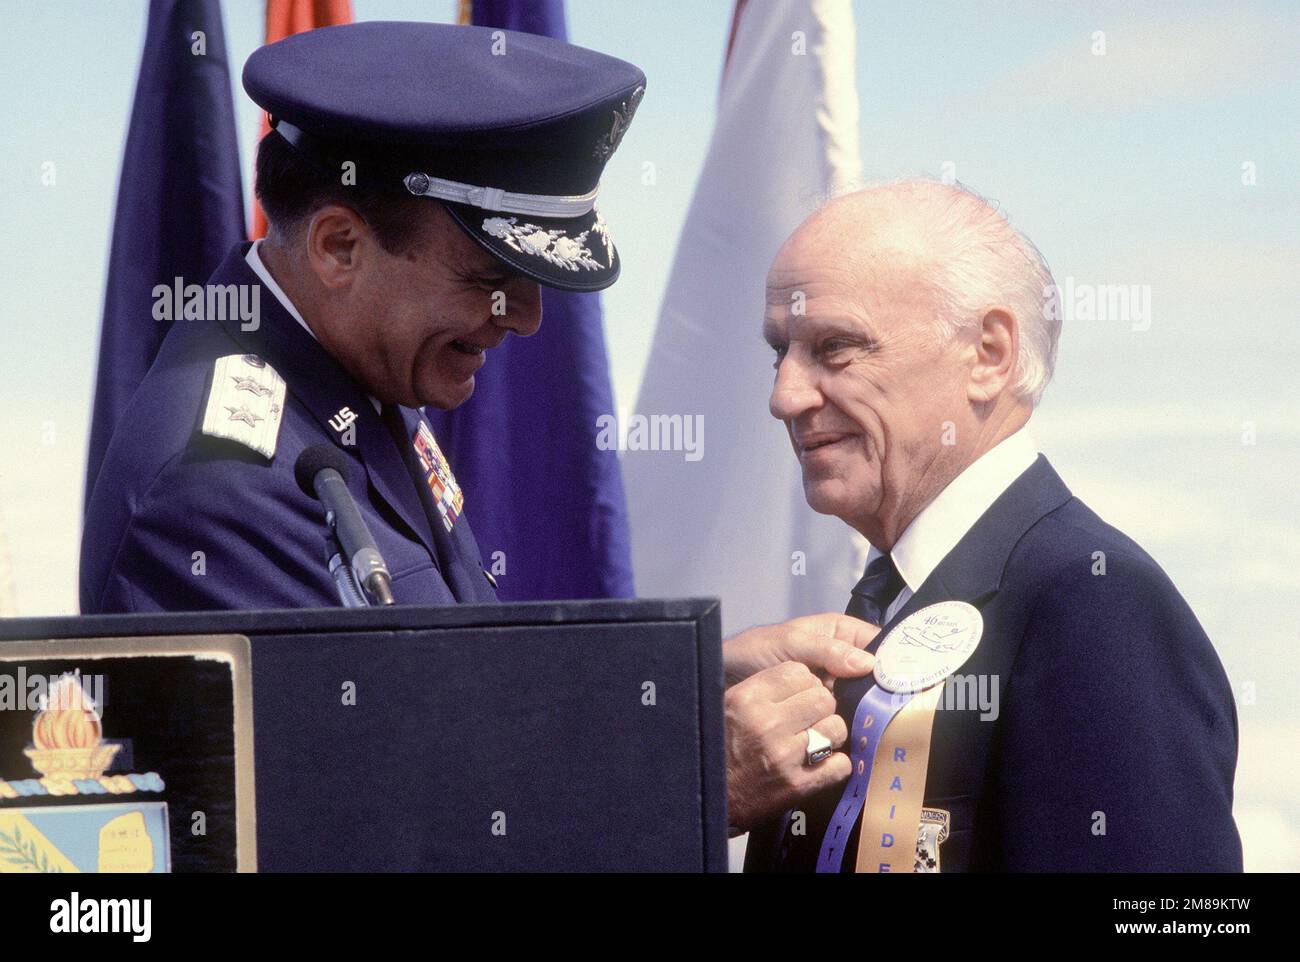 Jacob D. DeShazer, one of Doolittle's Raiders, receives his POW/MIA medal for service in World War II from Major General Alexander K. Davidson, commander, 22nd Air Force, Military Airlift Command. Base: Nav Post Grad School, Monterey State: California (CA) Country: United States Of America (USA) Stock Photo